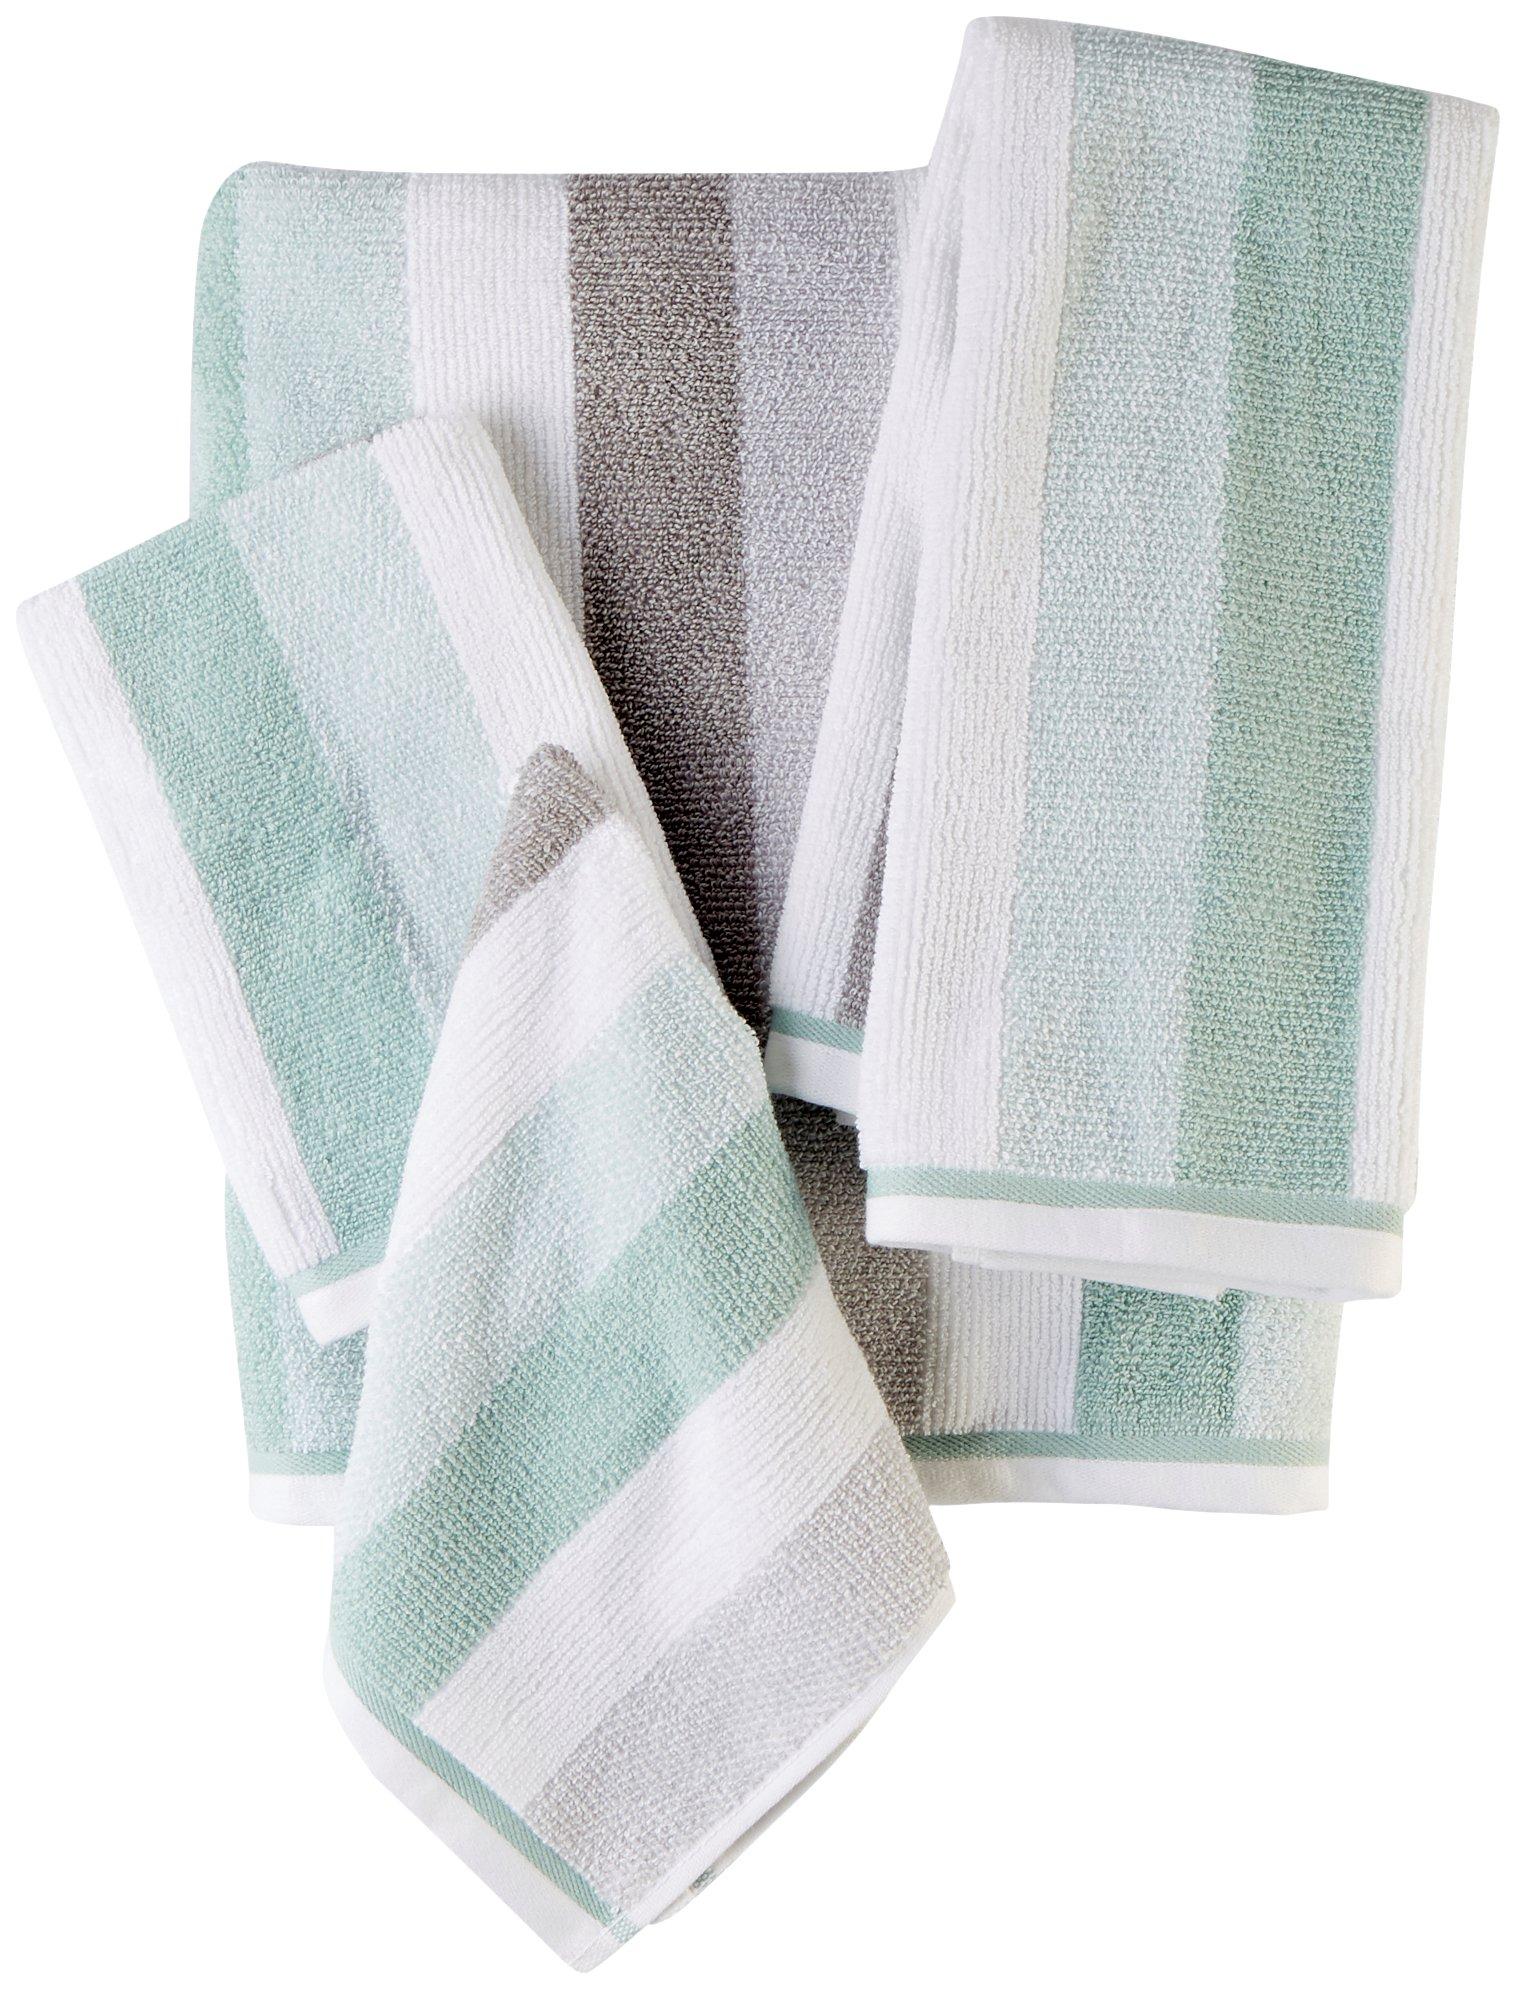 2 Hand Towels Caro Home Collection White Aqua Blue Stitching Soft Quick Dry